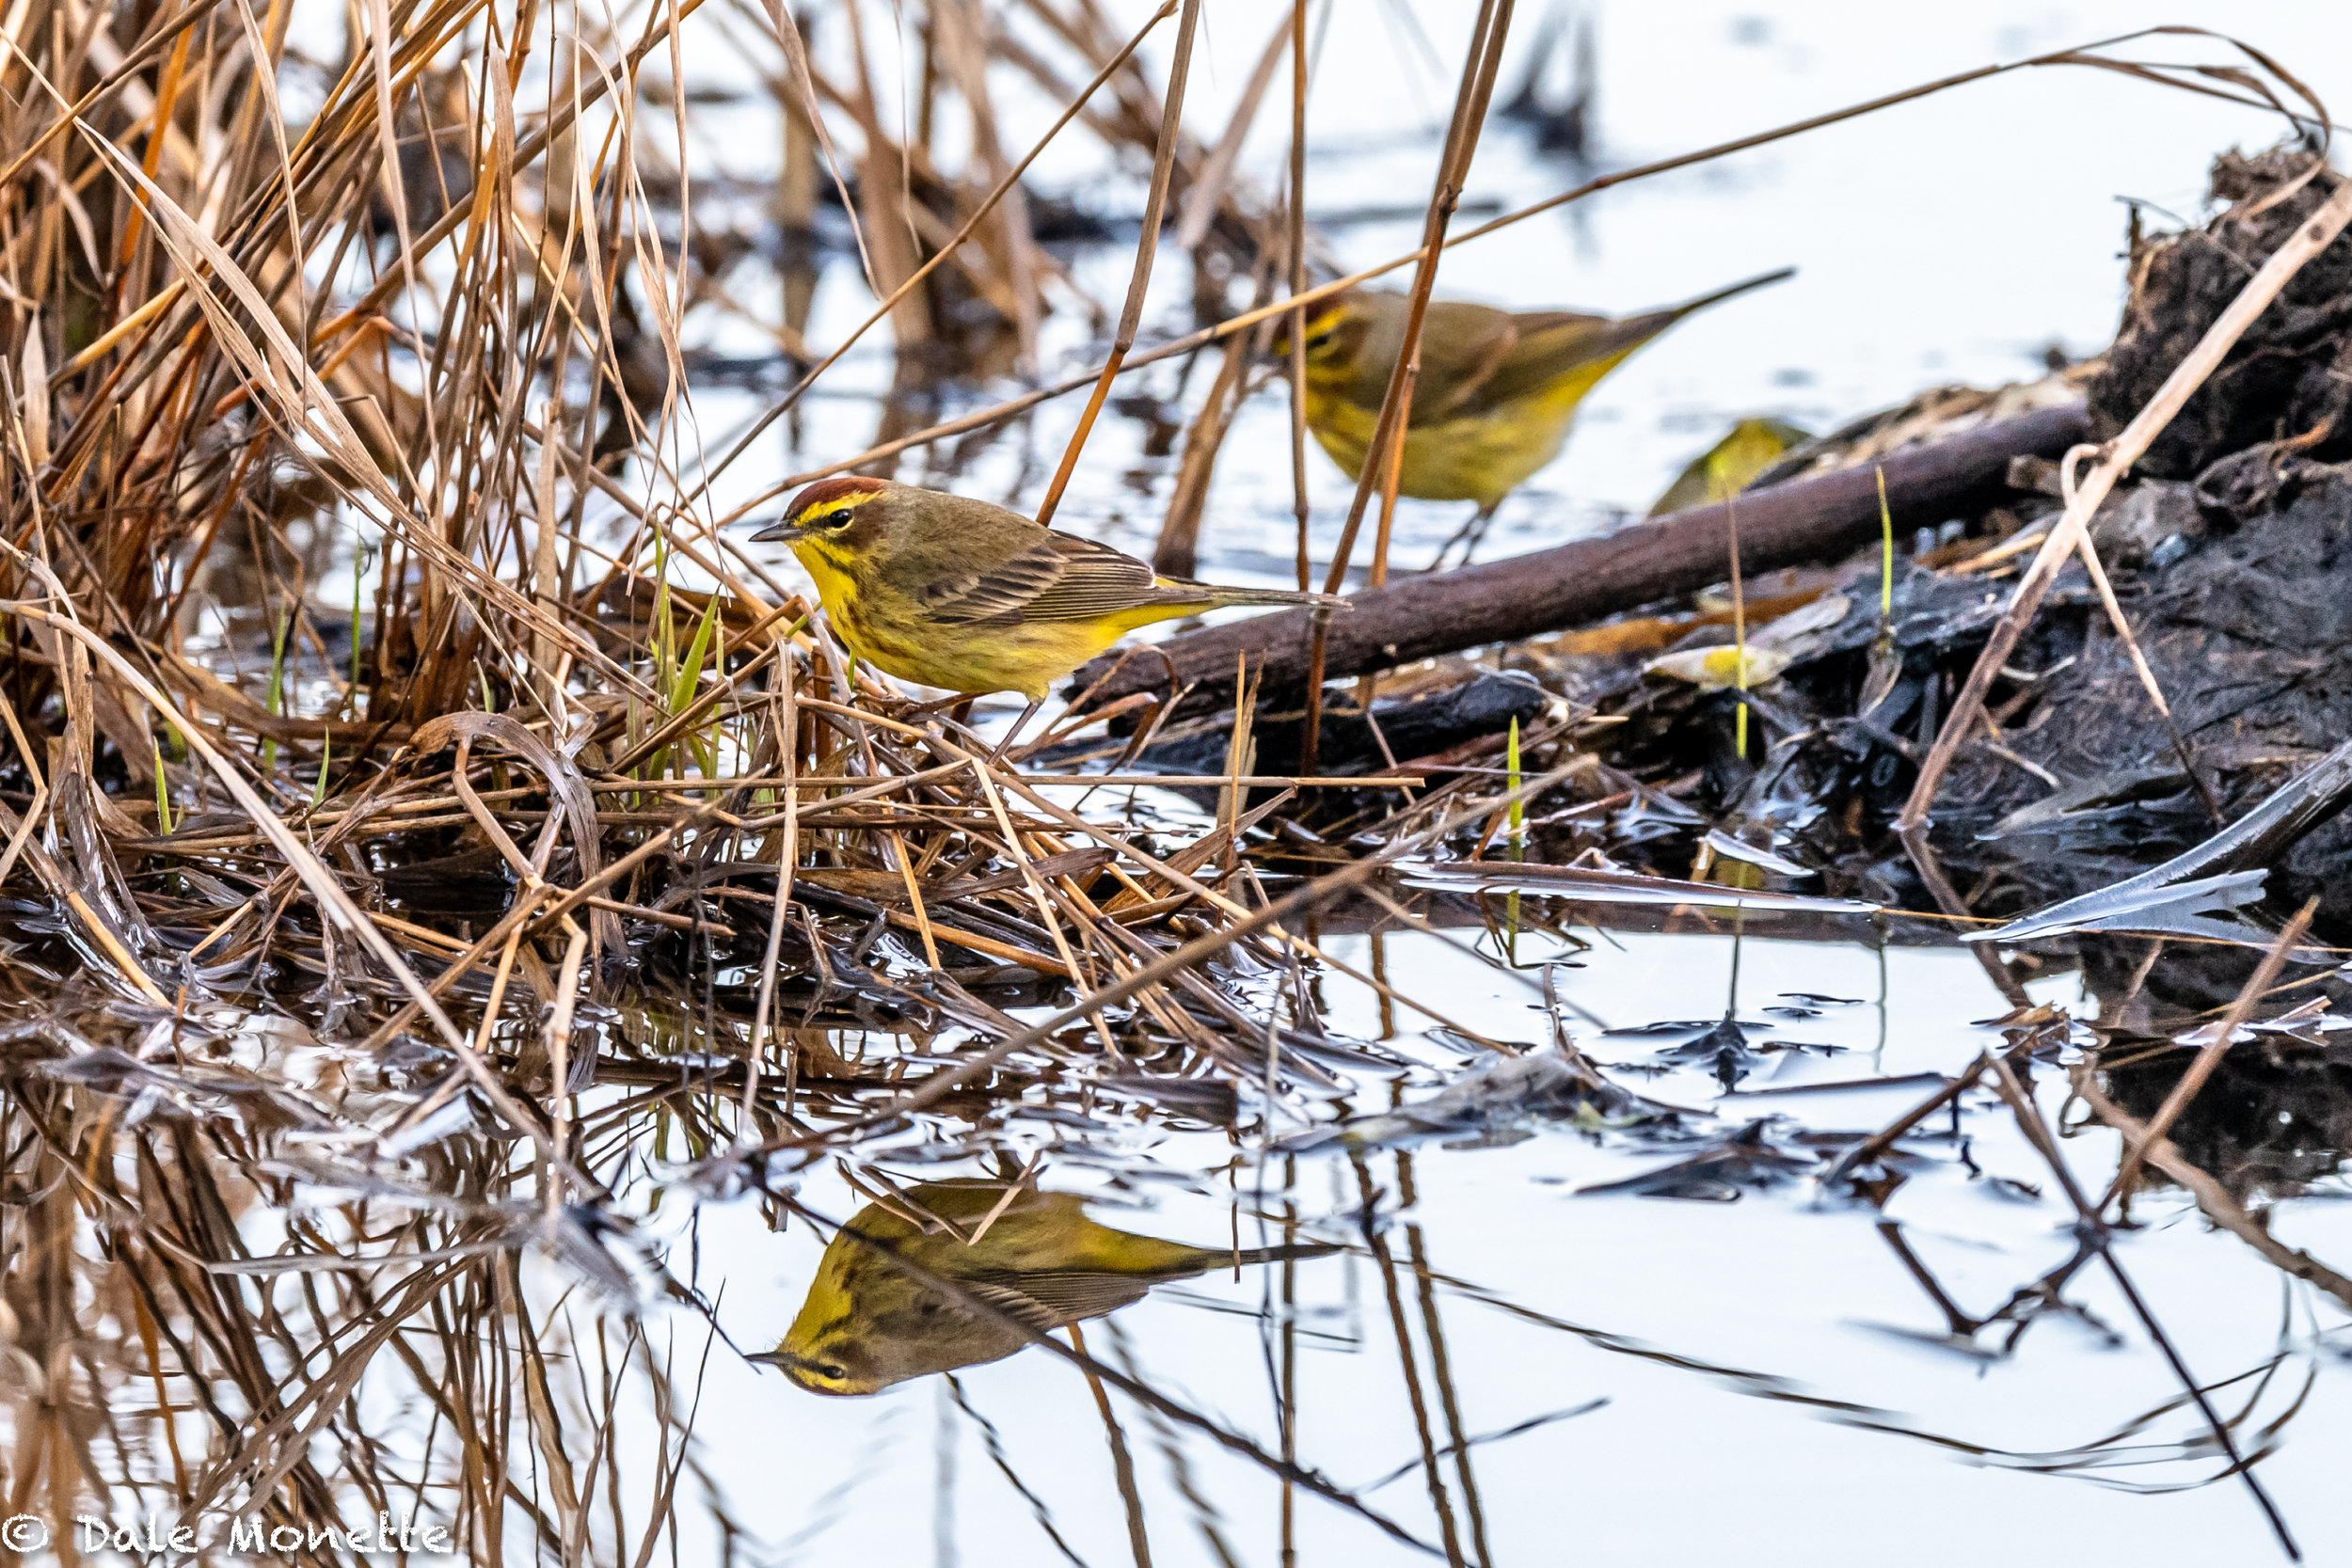   While setting in the woods watching the otters I was swarmed with migrating warblers.  These palm warblers are usually the first warbler, along with pine warblers, that we see in the spring.  